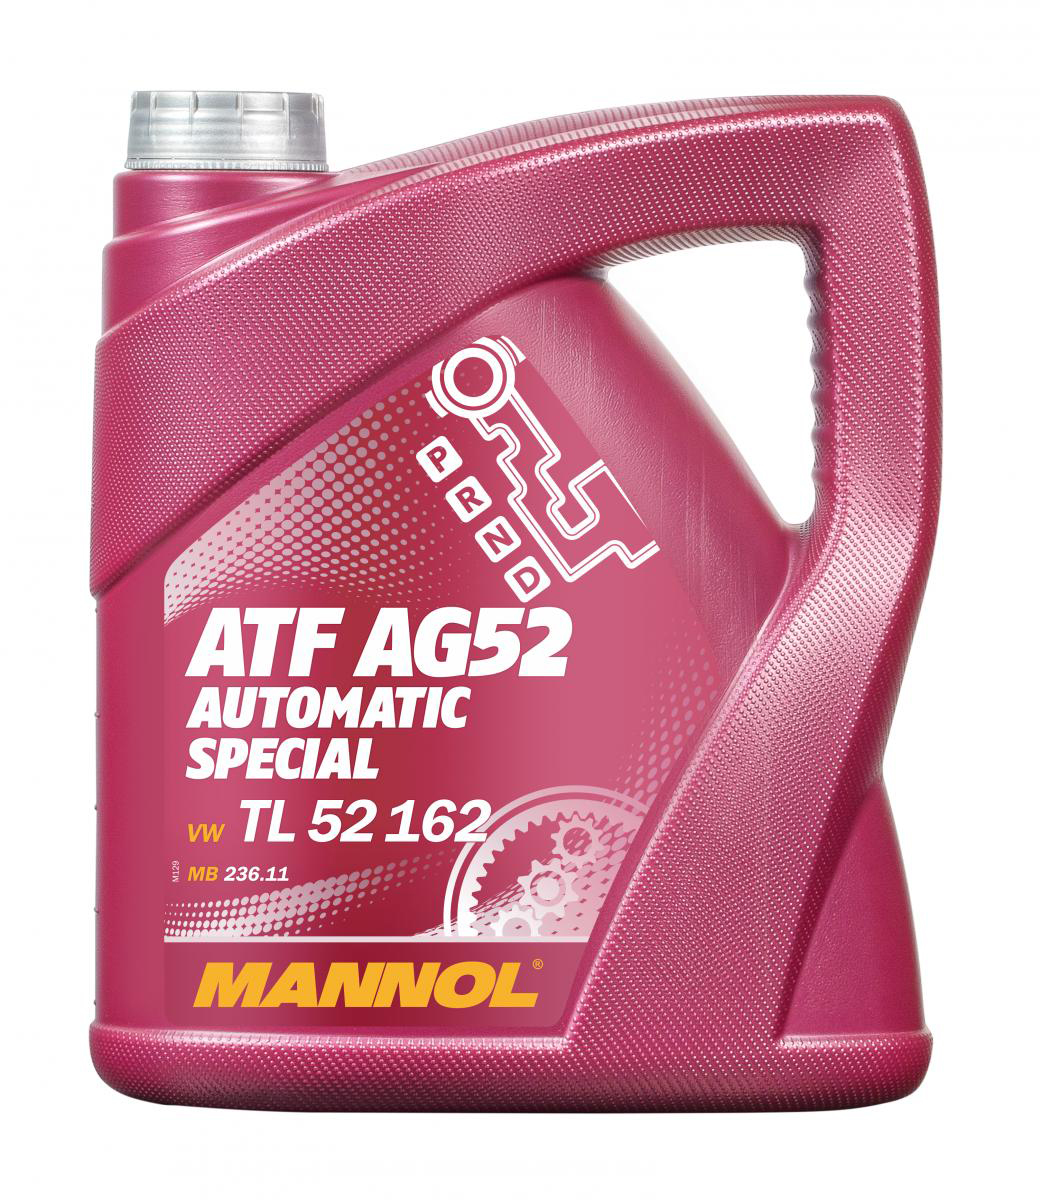 ATF AG52 Automatic Special